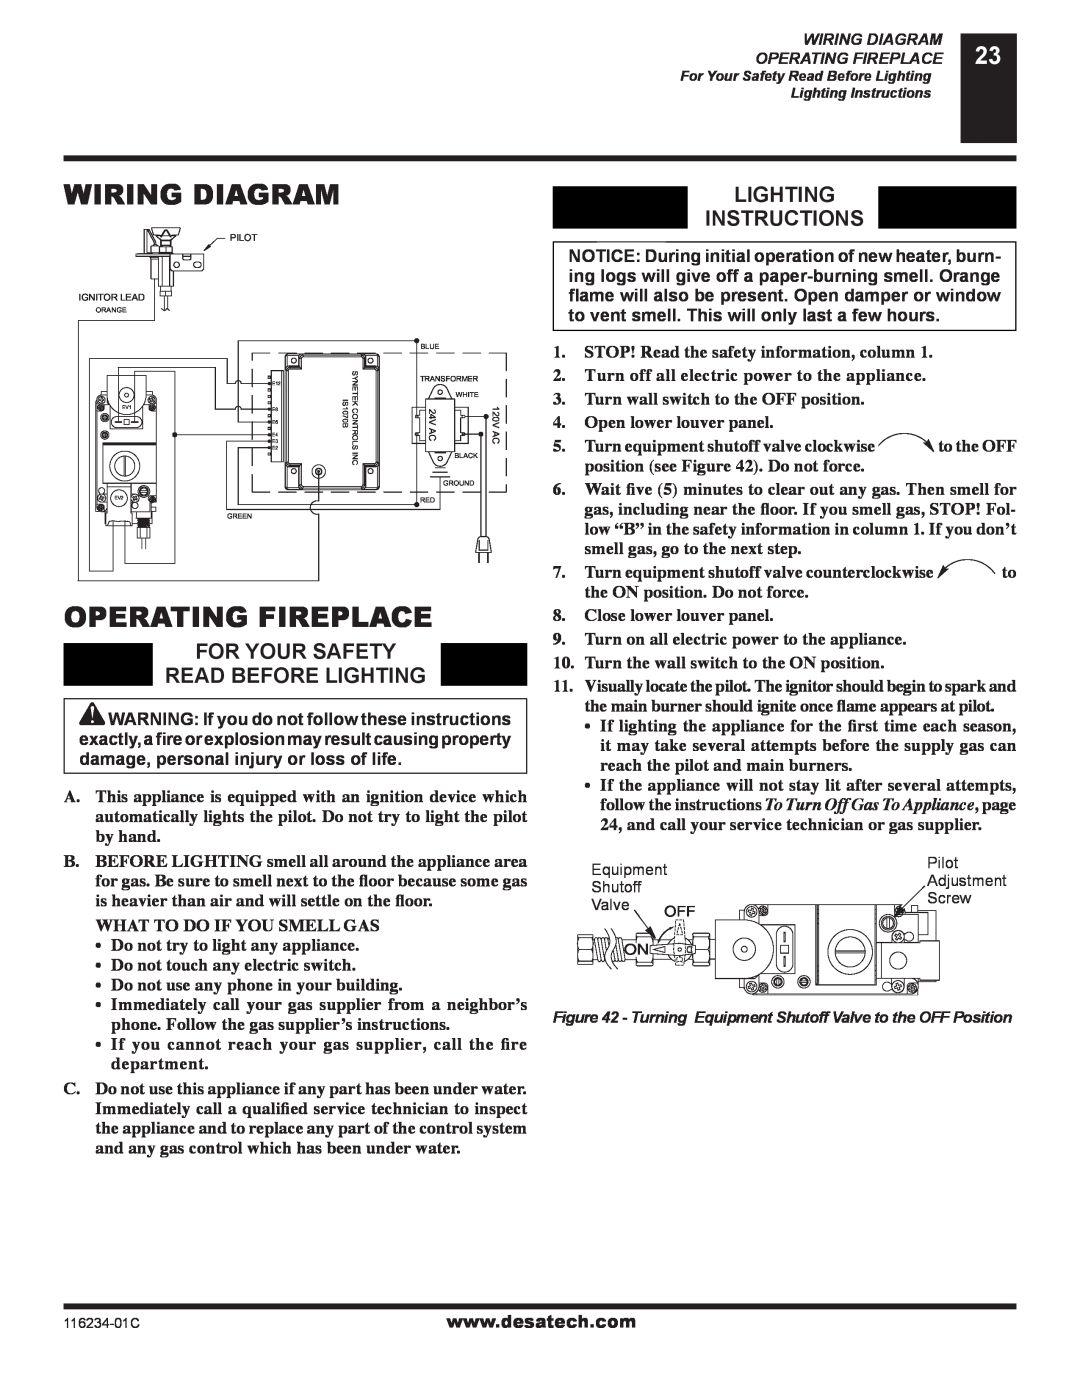 Desa (V)TC36NE SERIES Wiring Diagram, Operating Fireplace, Lighting Instructions, For Your Safety, Read Before Lighting 